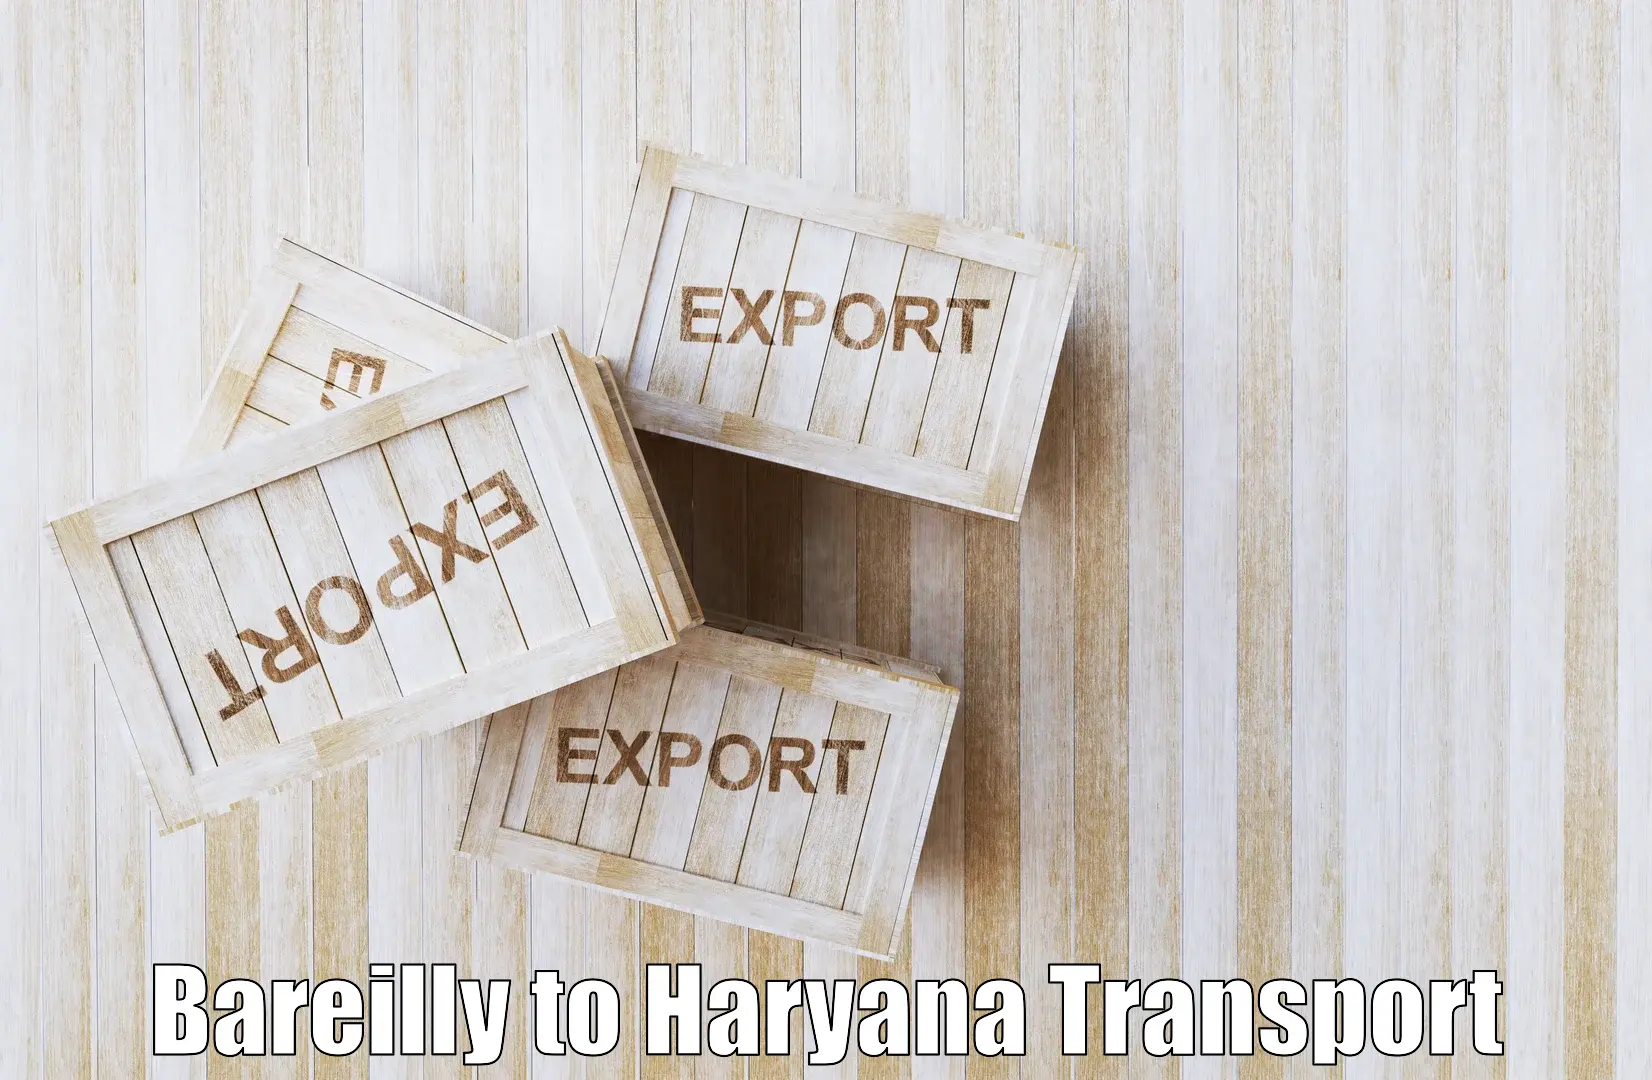 Online transport Bareilly to NCR Haryana